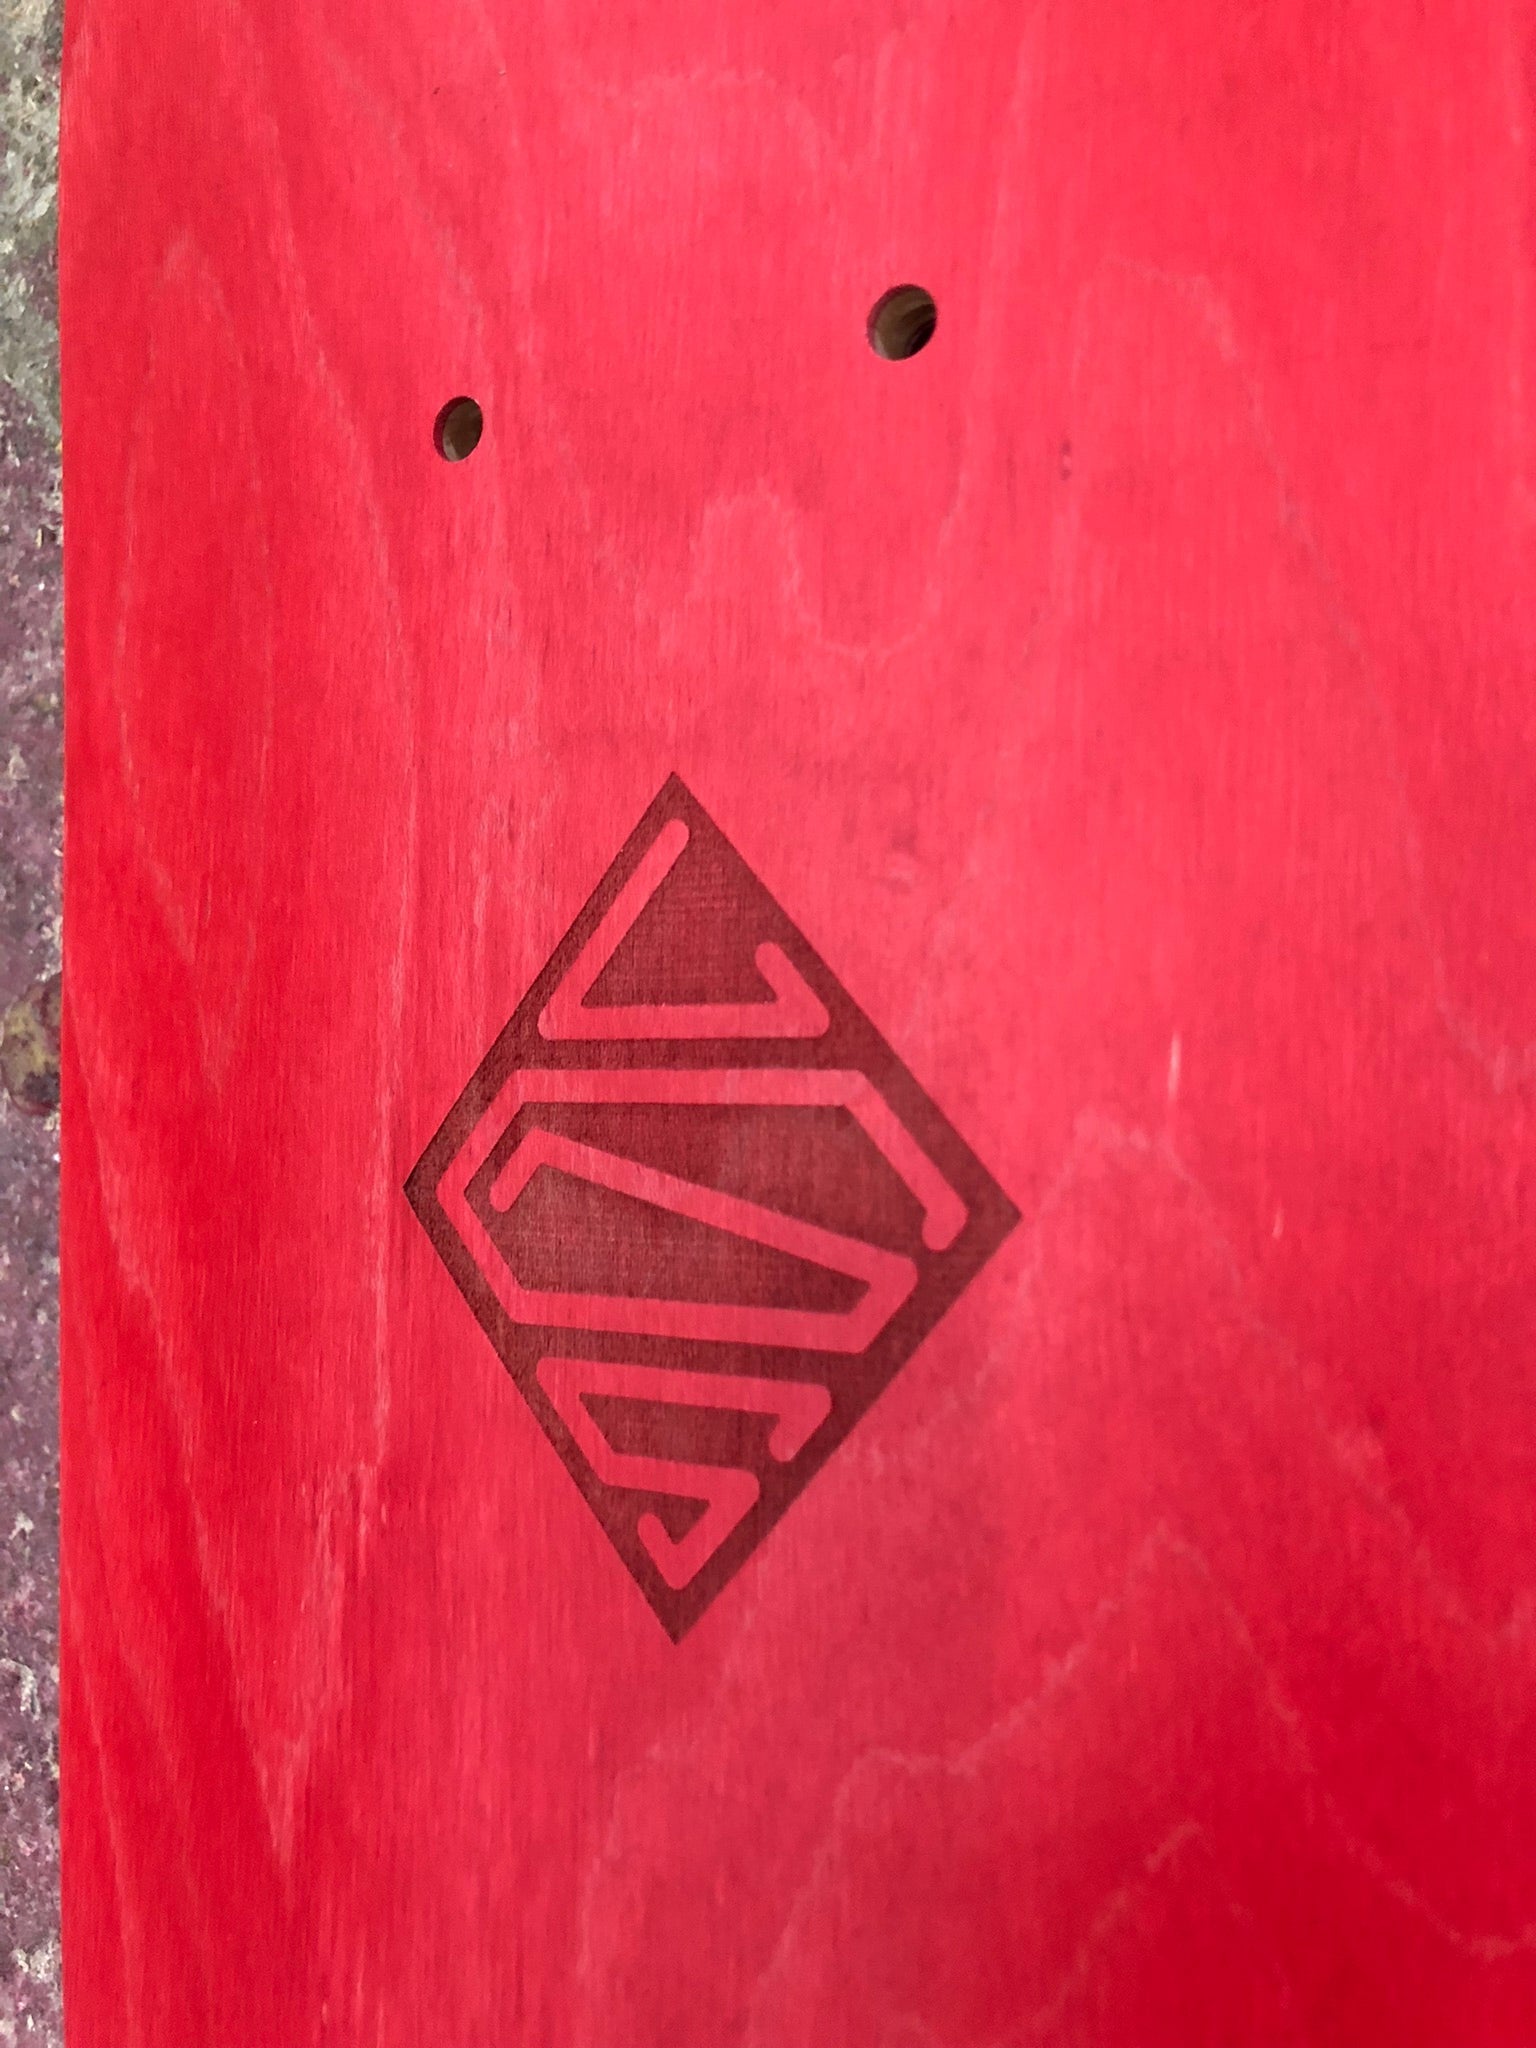 LGS Cruiser board, with clear grip, logos engraved